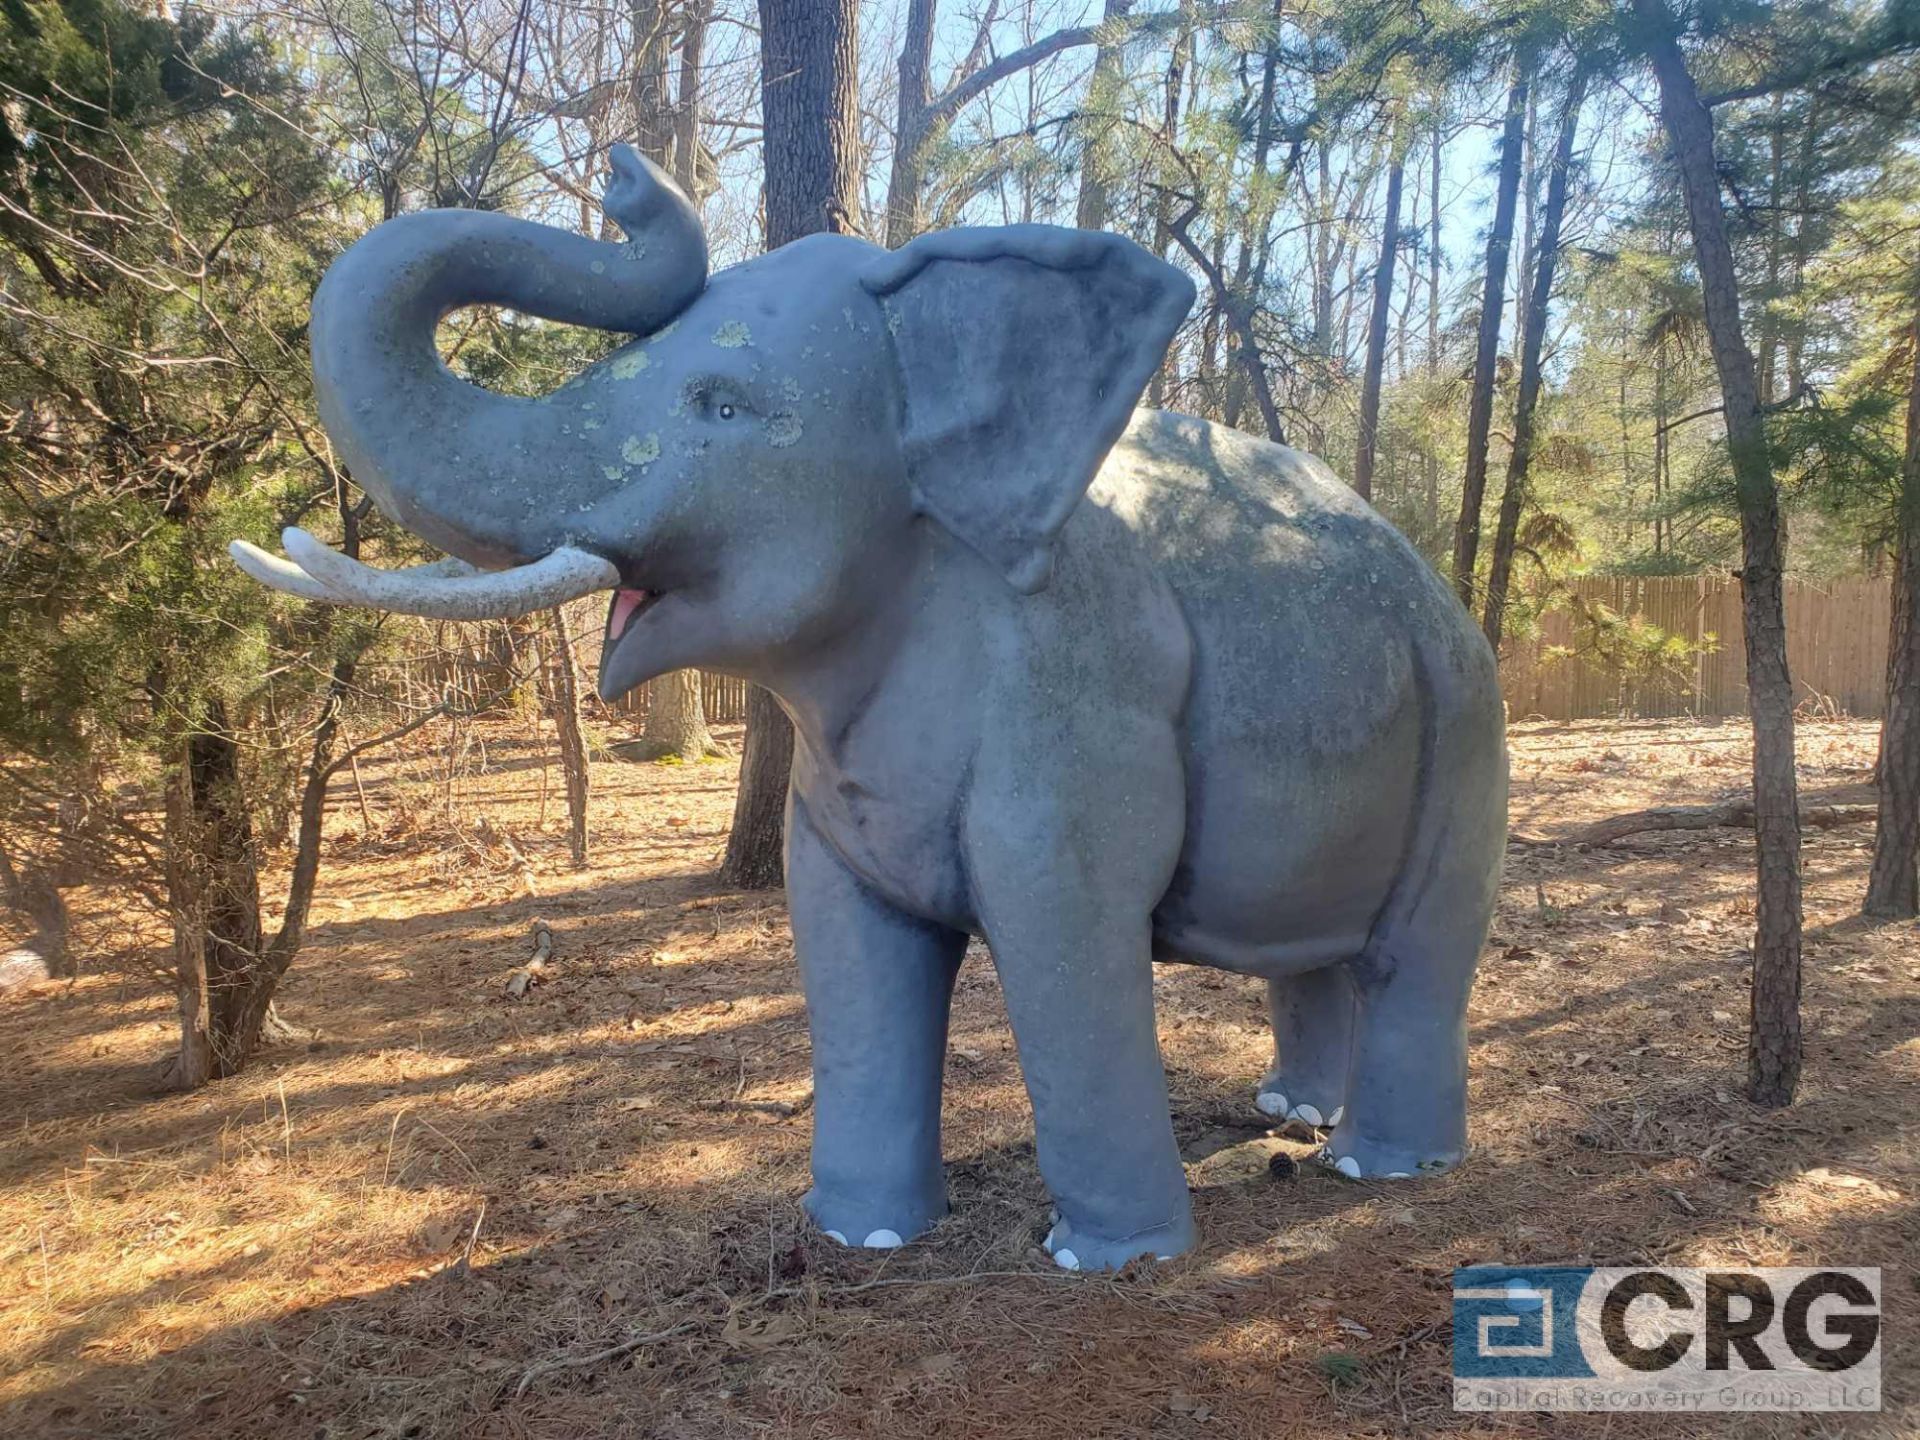 Elephant statue (located in train ride back of picnic area)